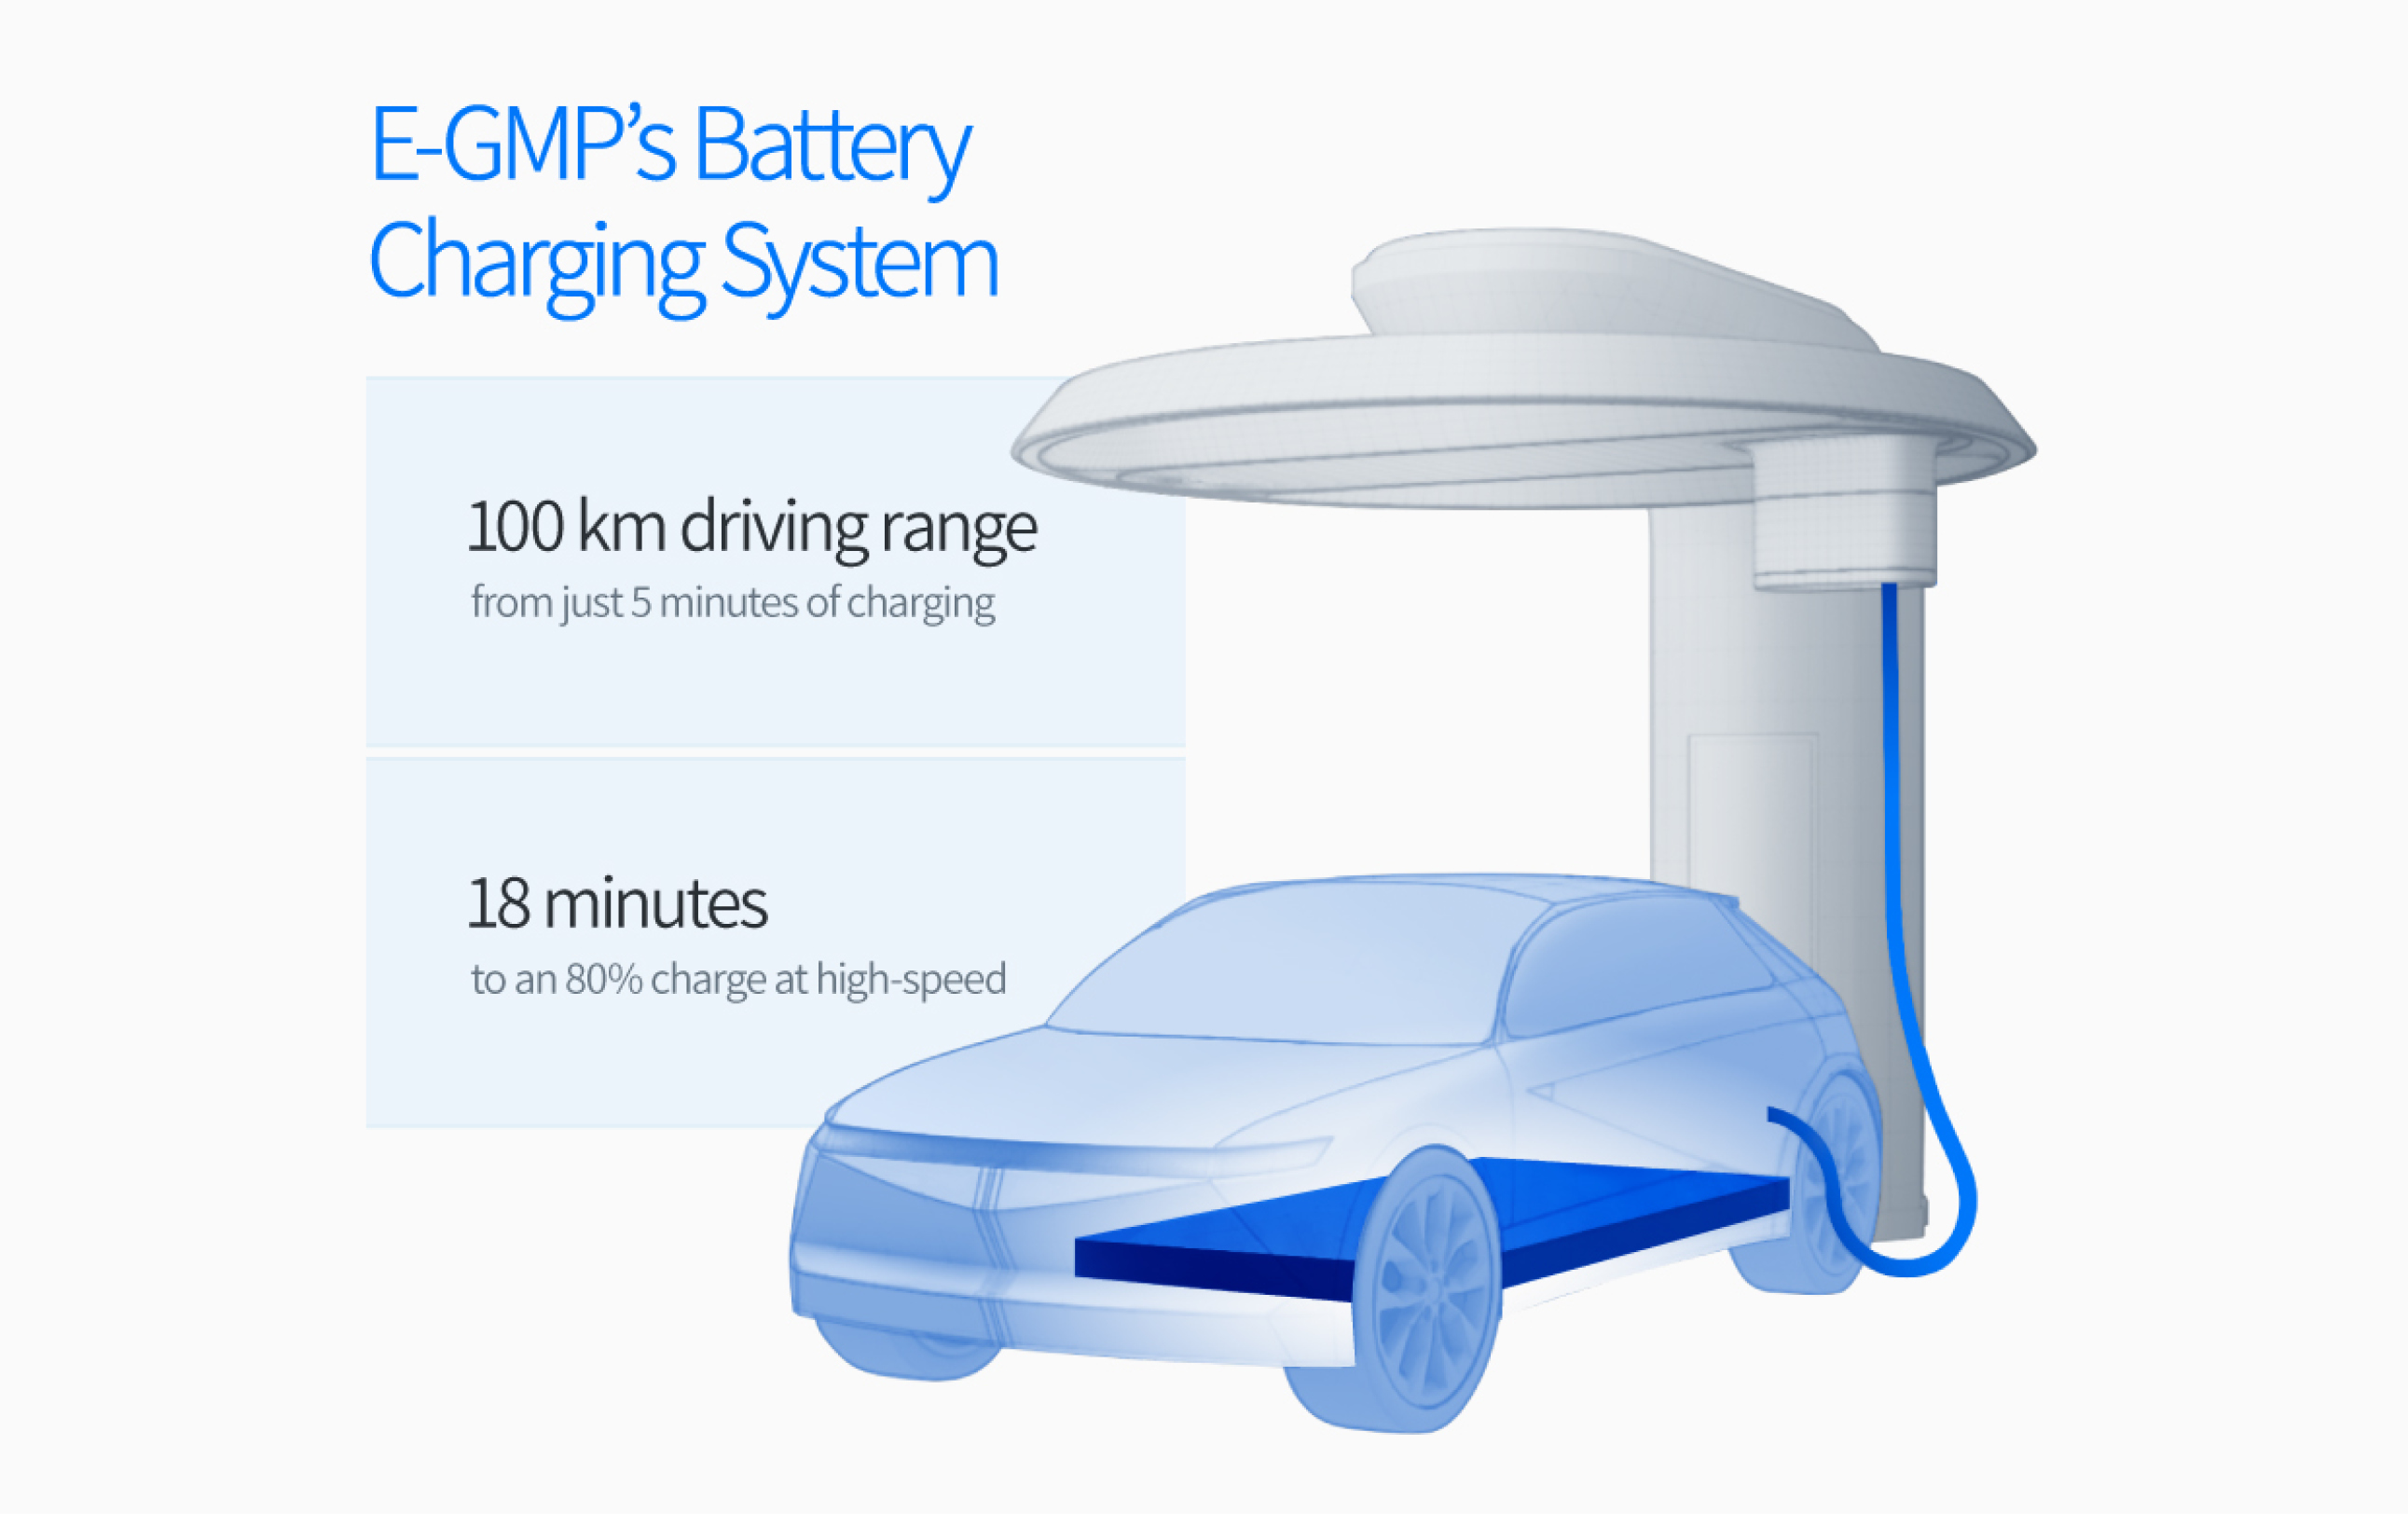 Infographic describing the E-GMP battery charging system